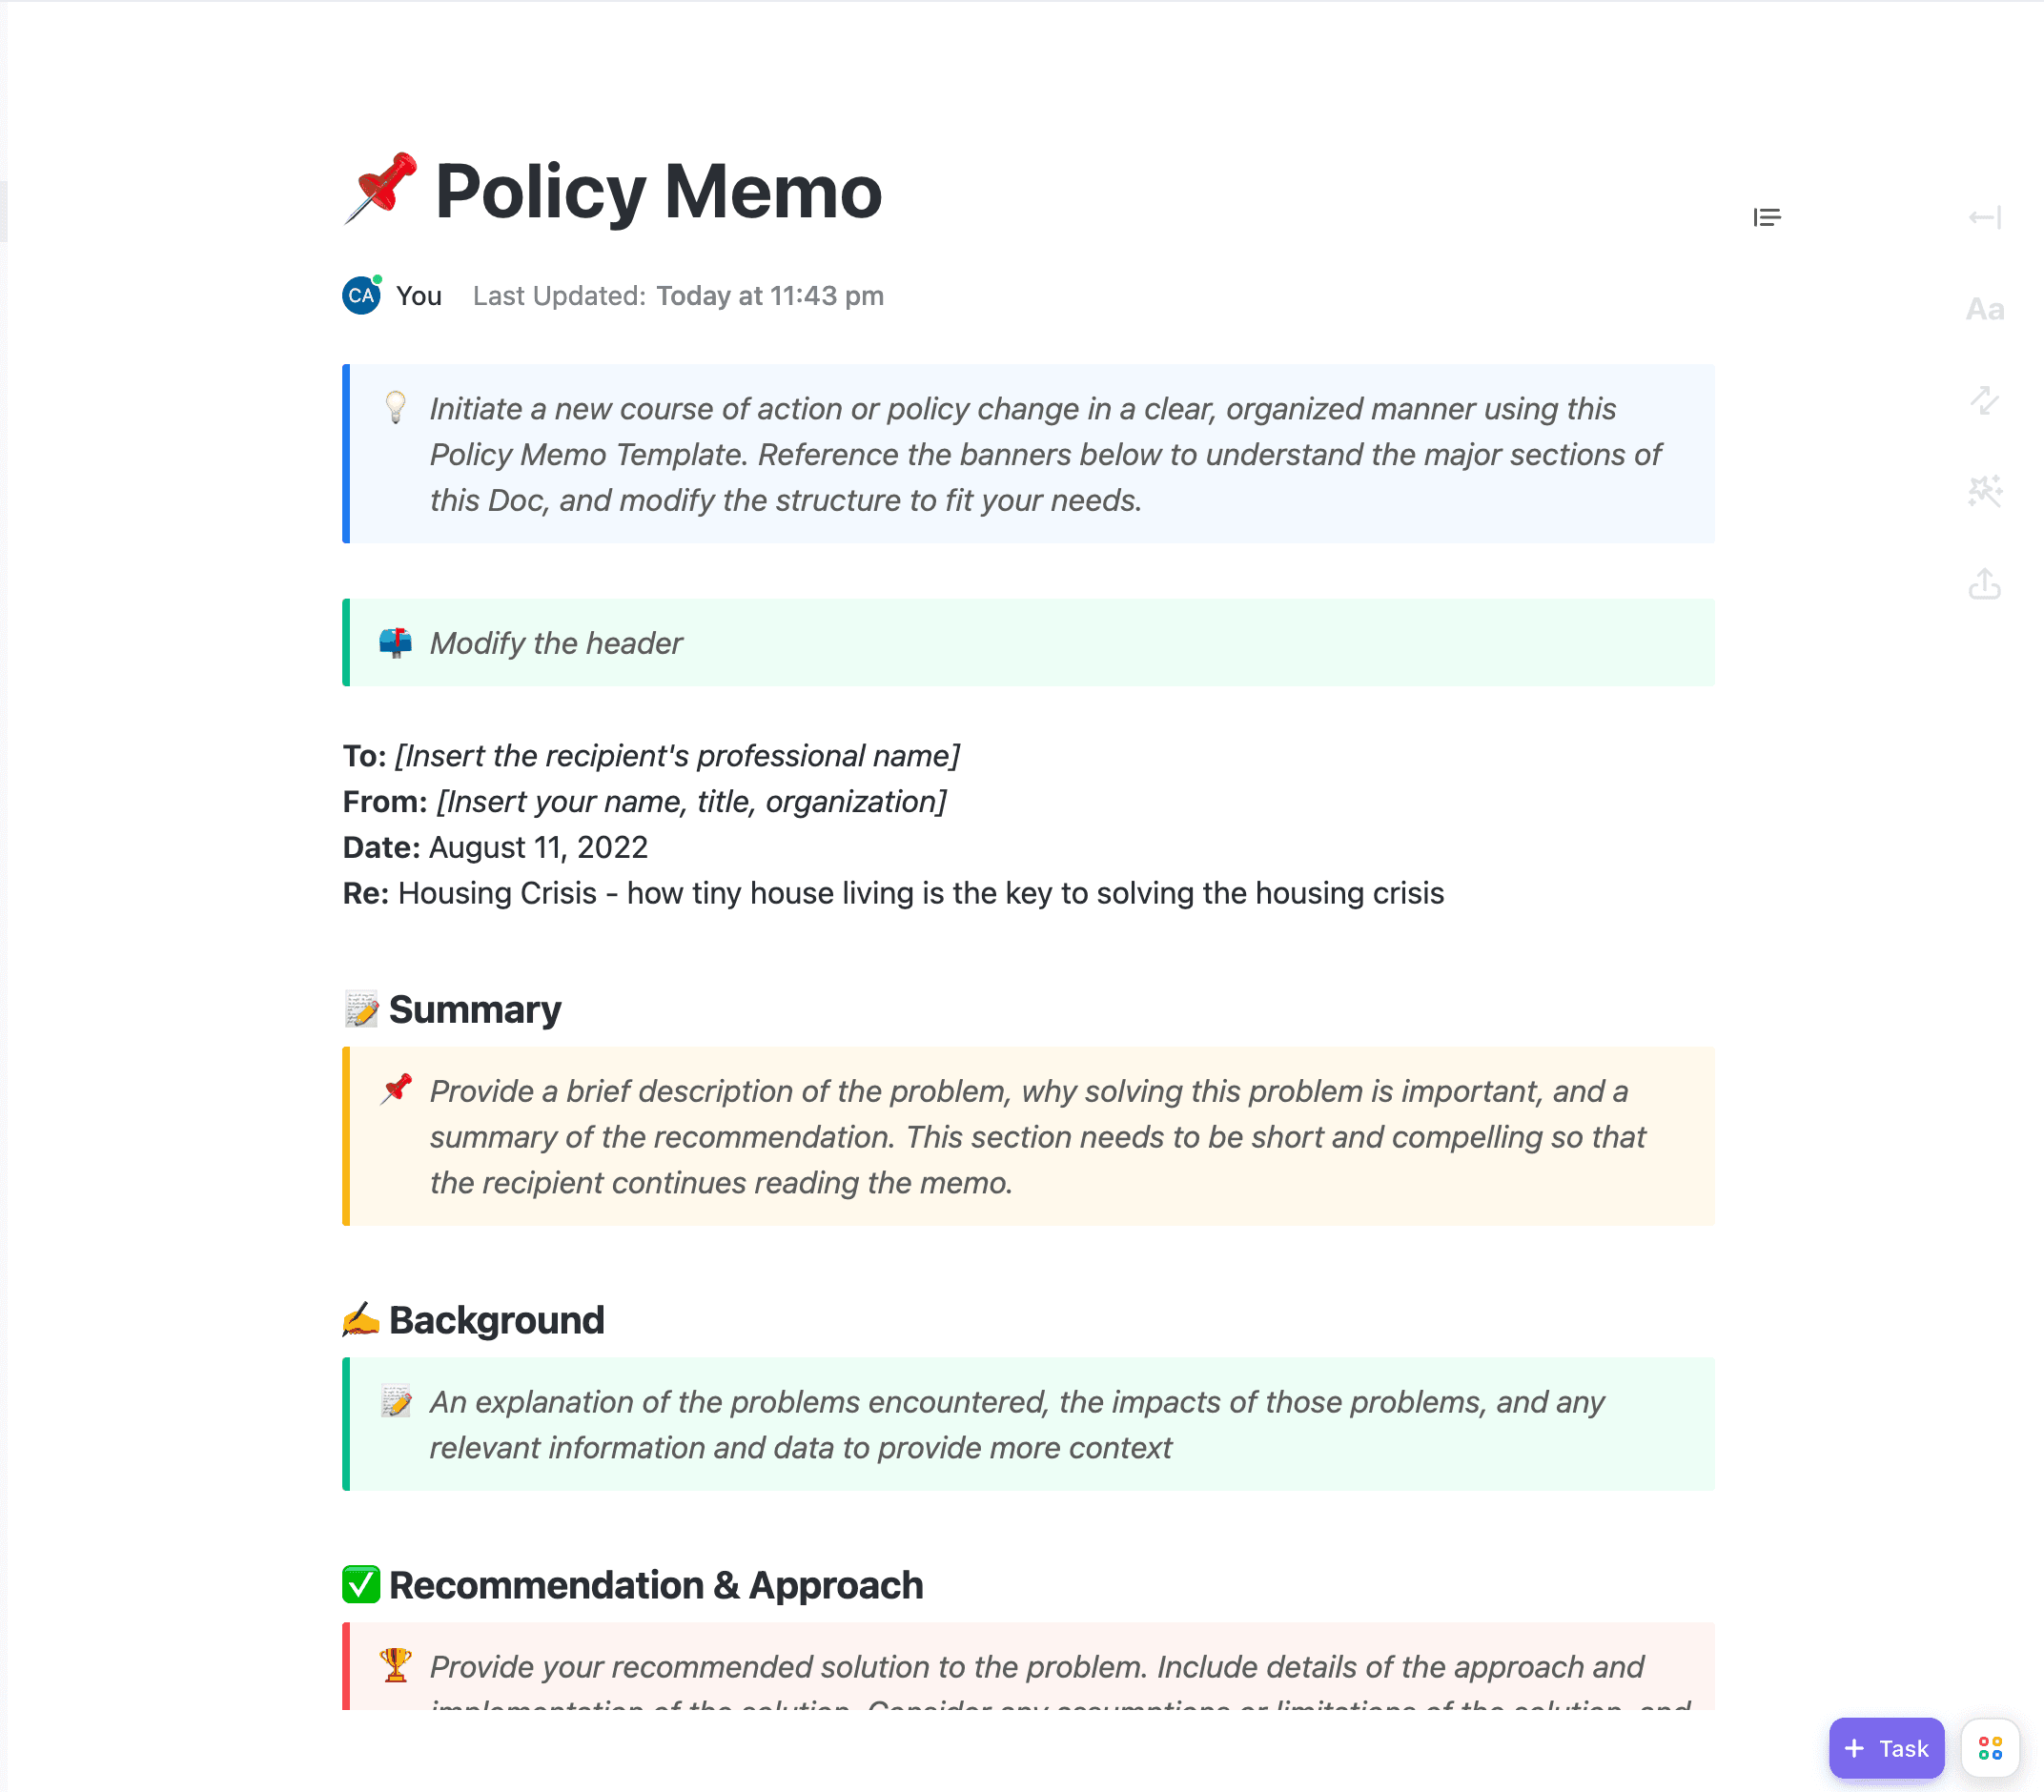 Initiate a new course of action or policy change in a clear, organized manner using this Policy Memo Template.